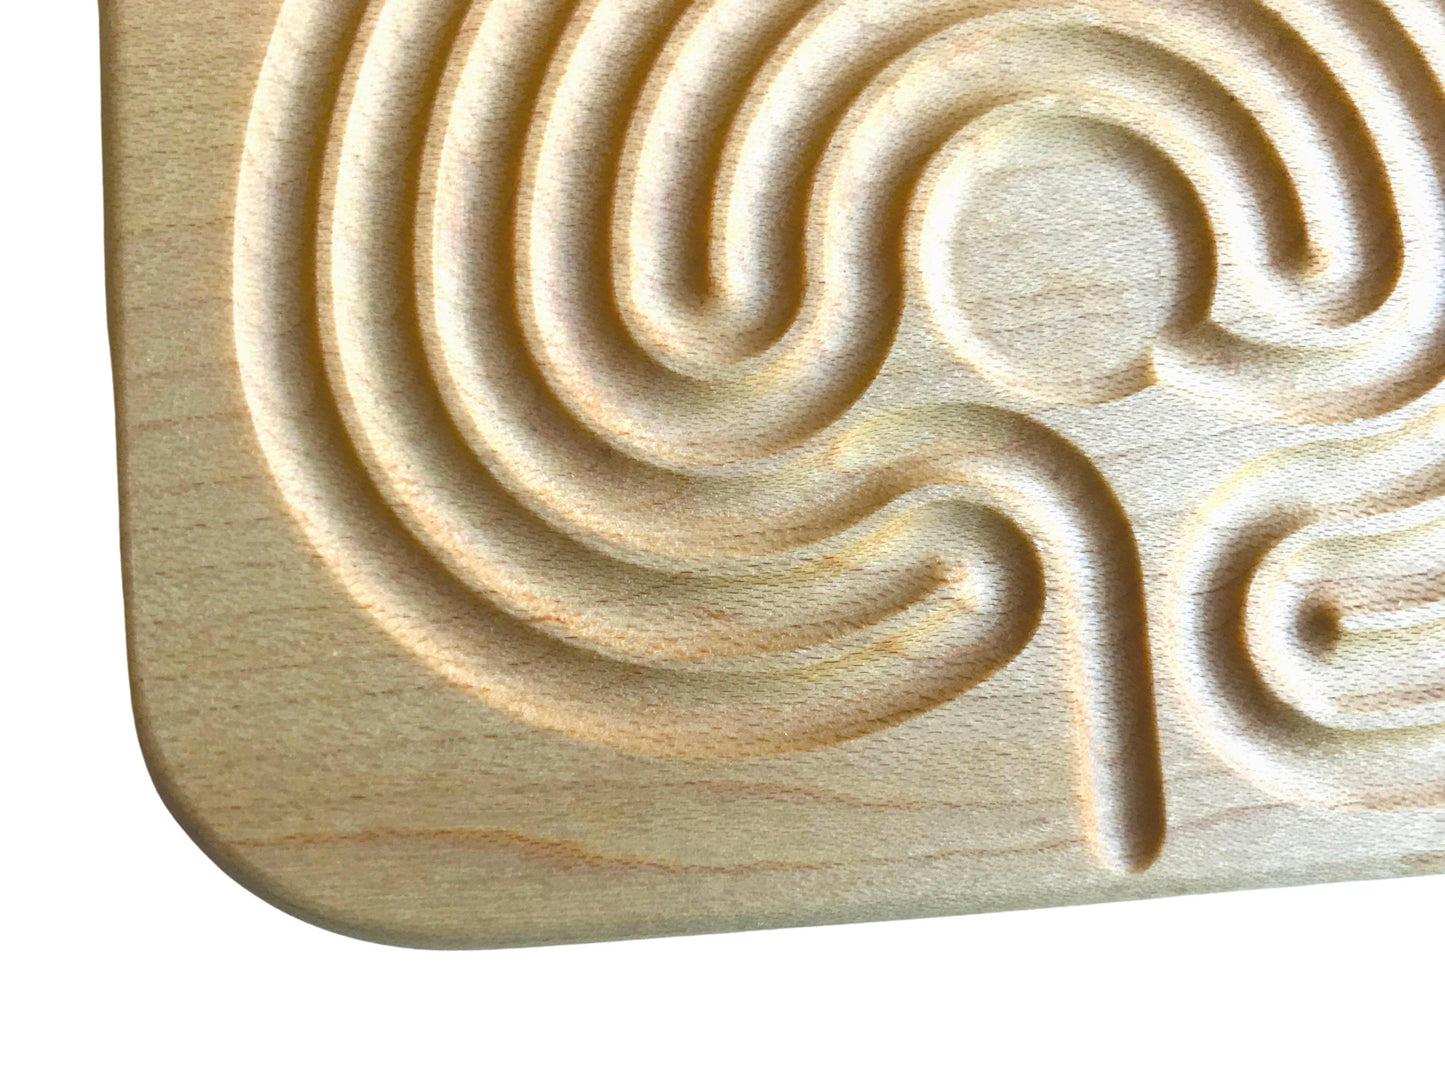 Small Classical Finger Labyrinth, Maple Wood, 4.75" by 3.75"